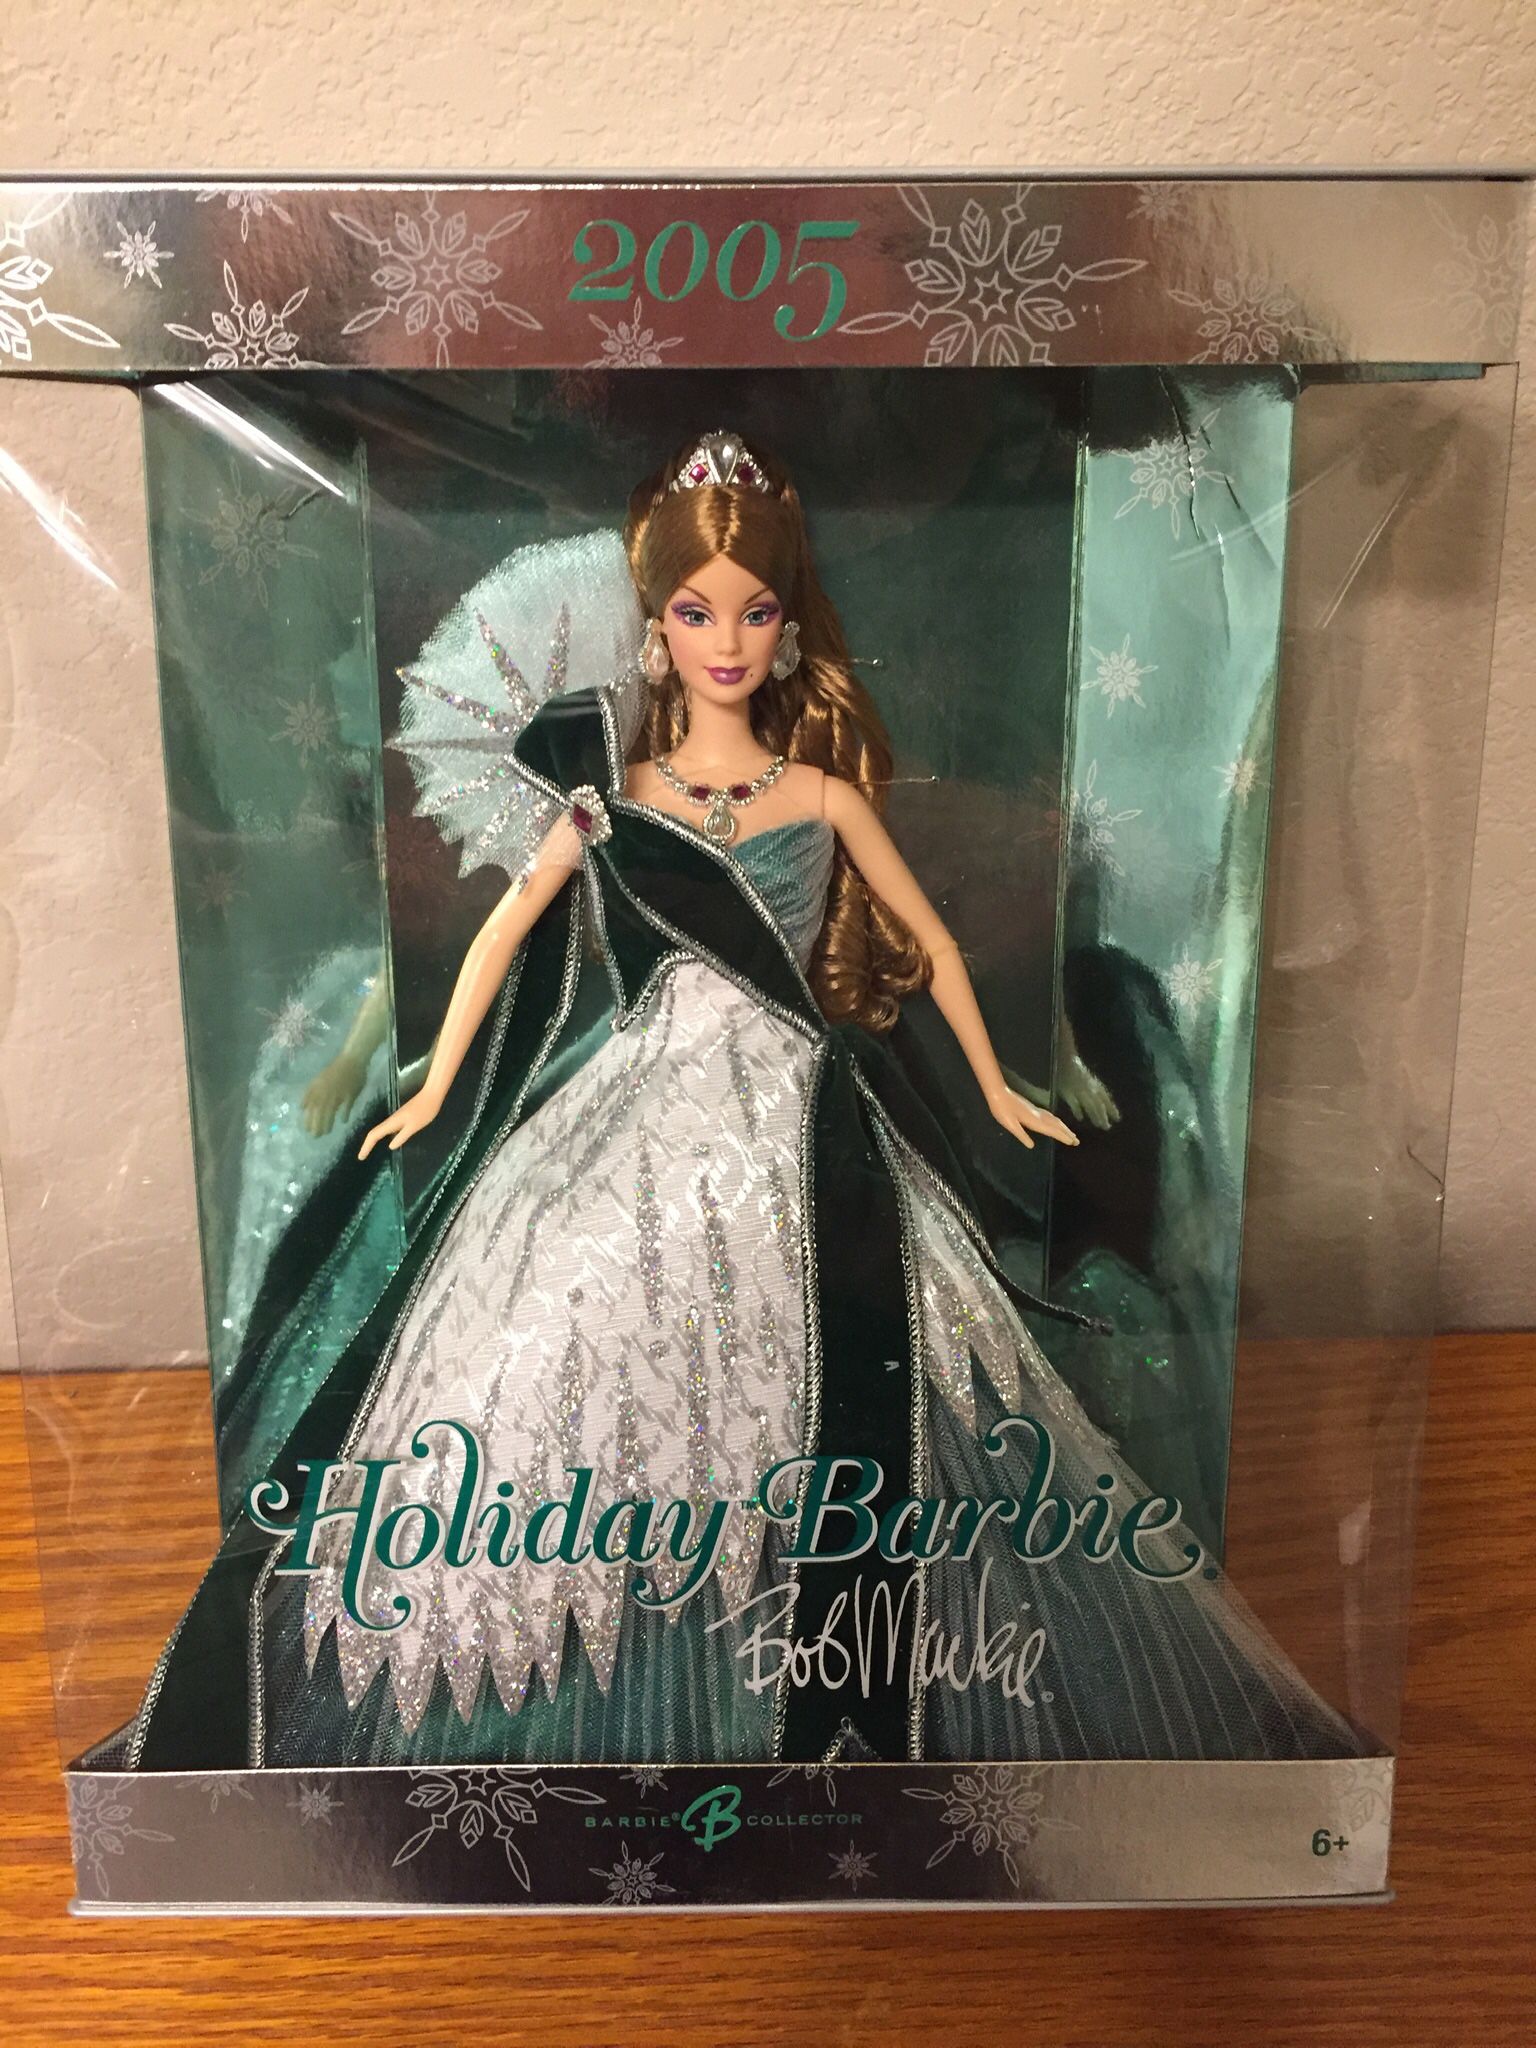 Collectible Holiday Barbie 2005 by famed designer to the stars, Bob Mackie.